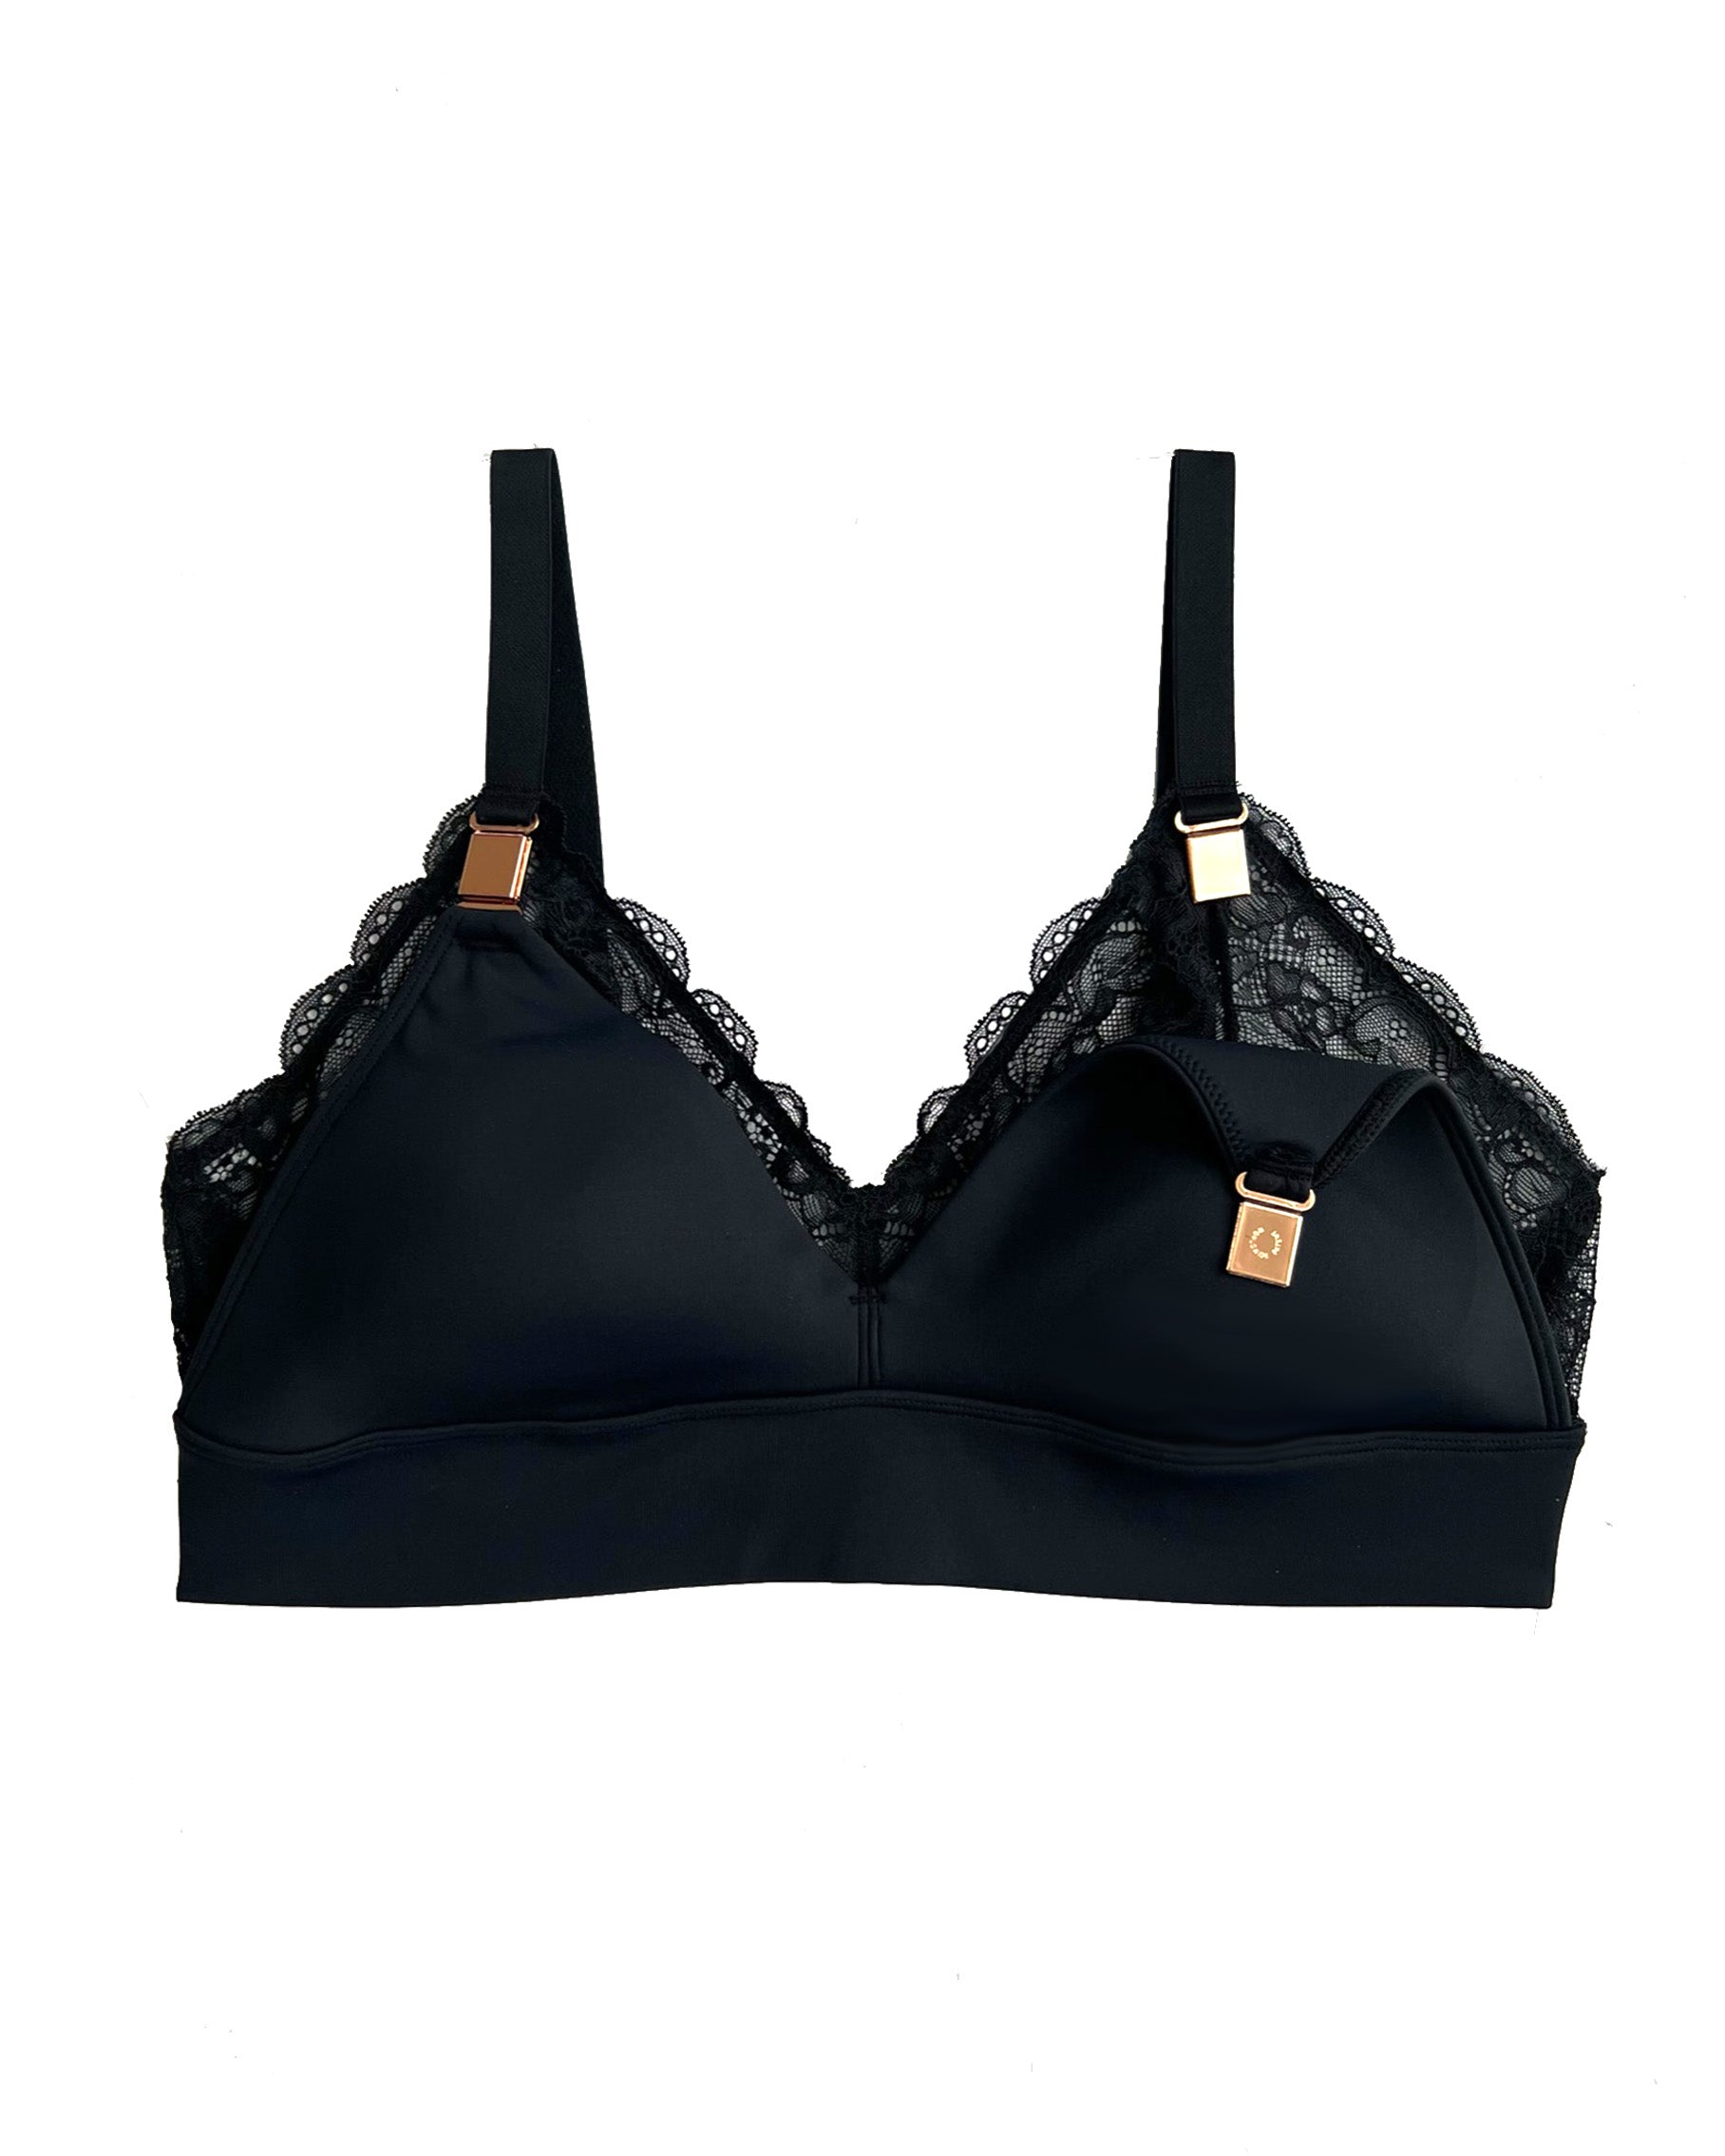 Shapee Lacey Nursing Bralettes - Mystic Black [32-40A/B/C/D] Limited and  Exclusive Design with Improved Non-Slip Straps, breastfeeding